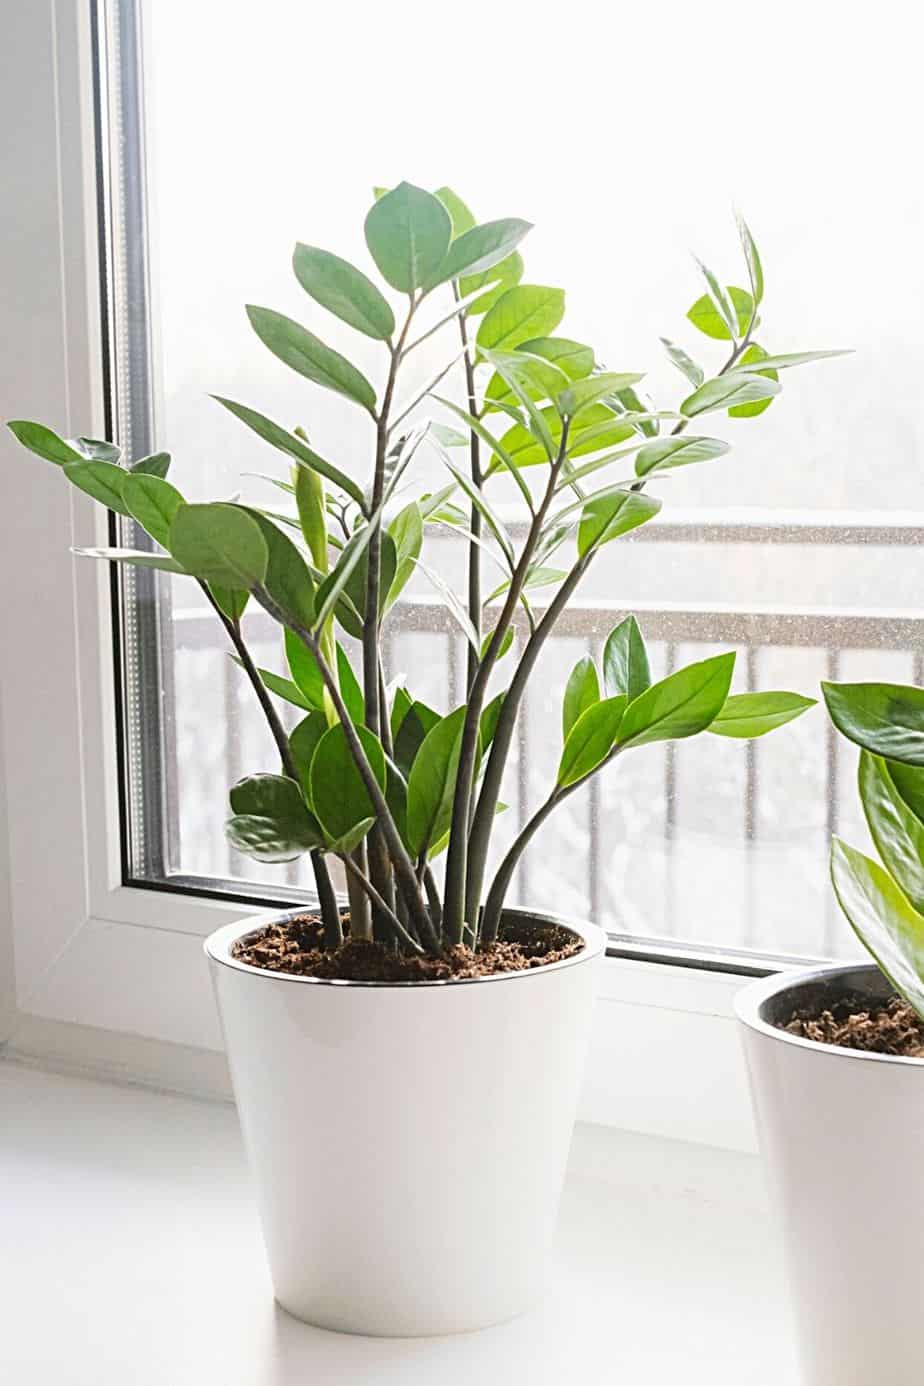 ZZ top is one of the plants that stands out the most when placed in northeast-facing windows